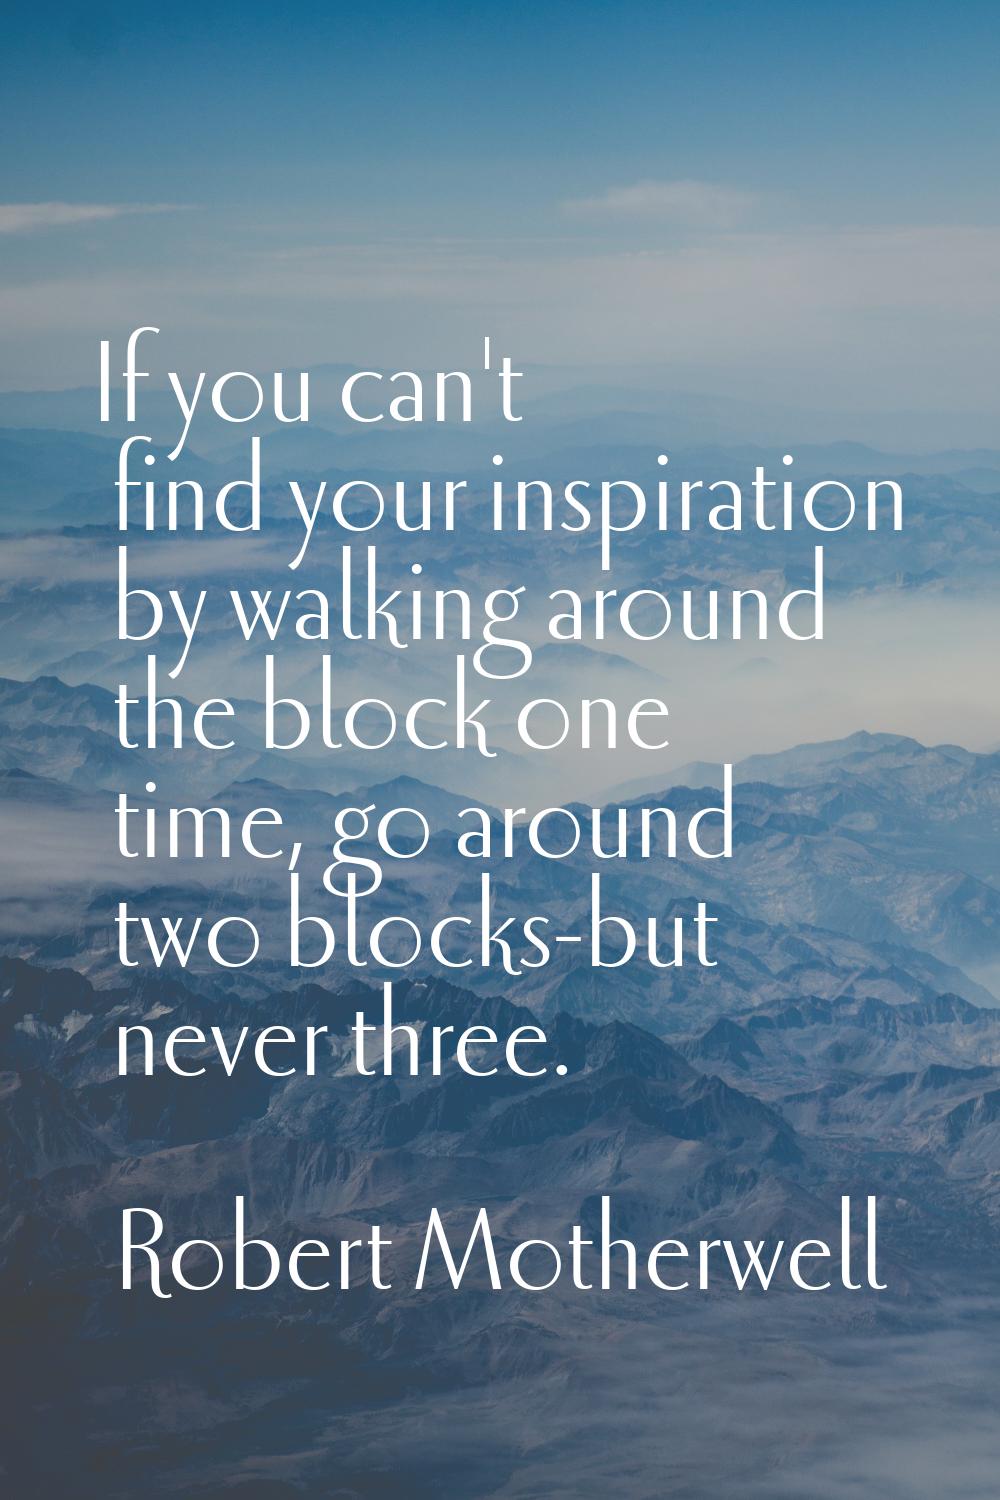 If you can't find your inspiration by walking around the block one time, go around two blocks-but n